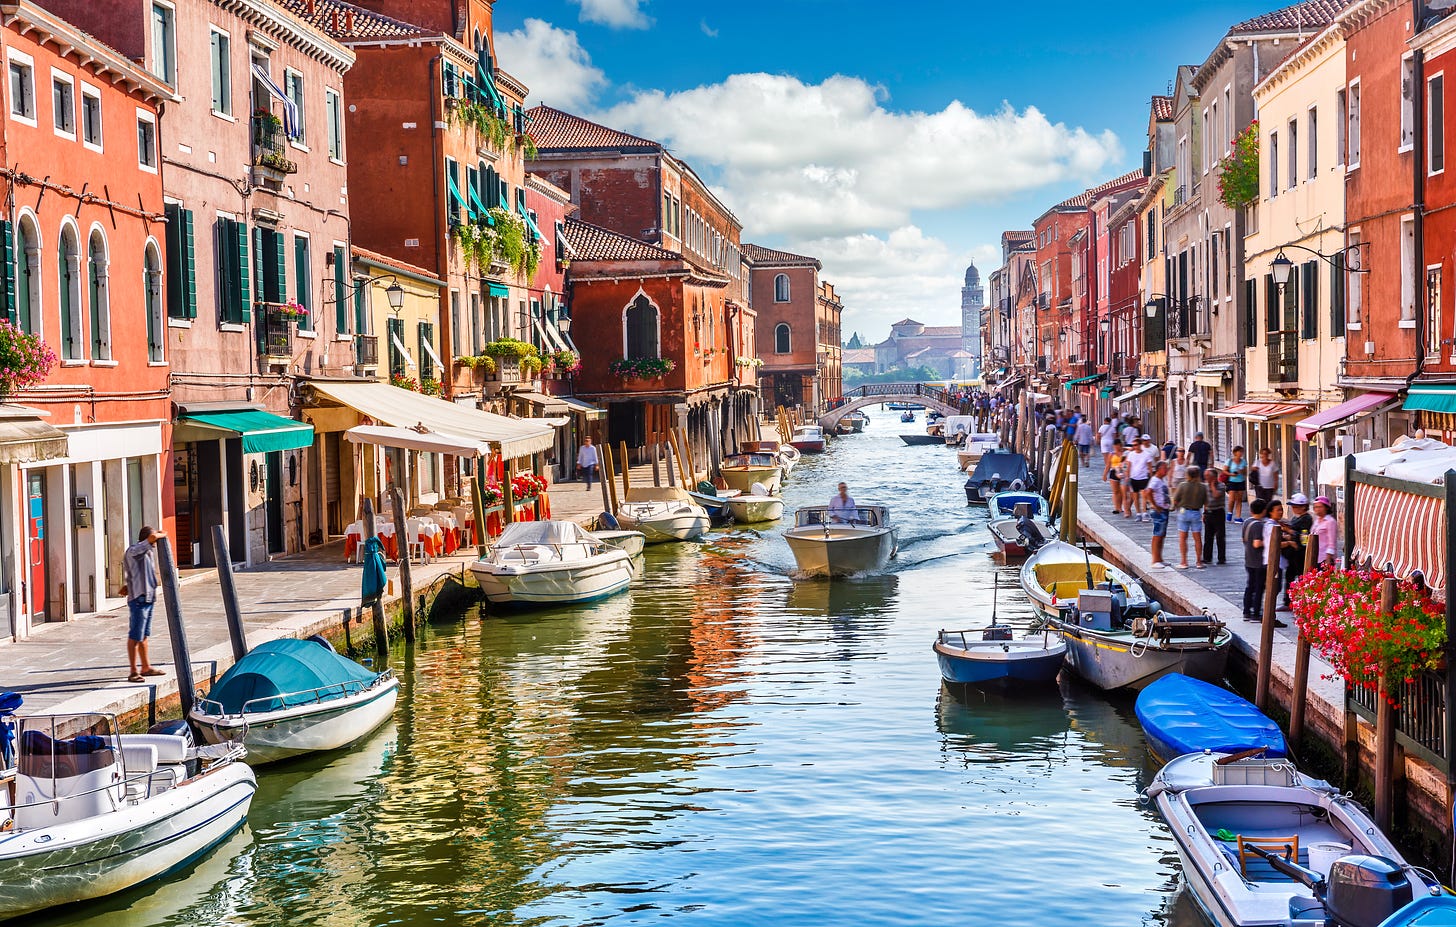 The Island of Murano, Venice: what to see - Italia.it